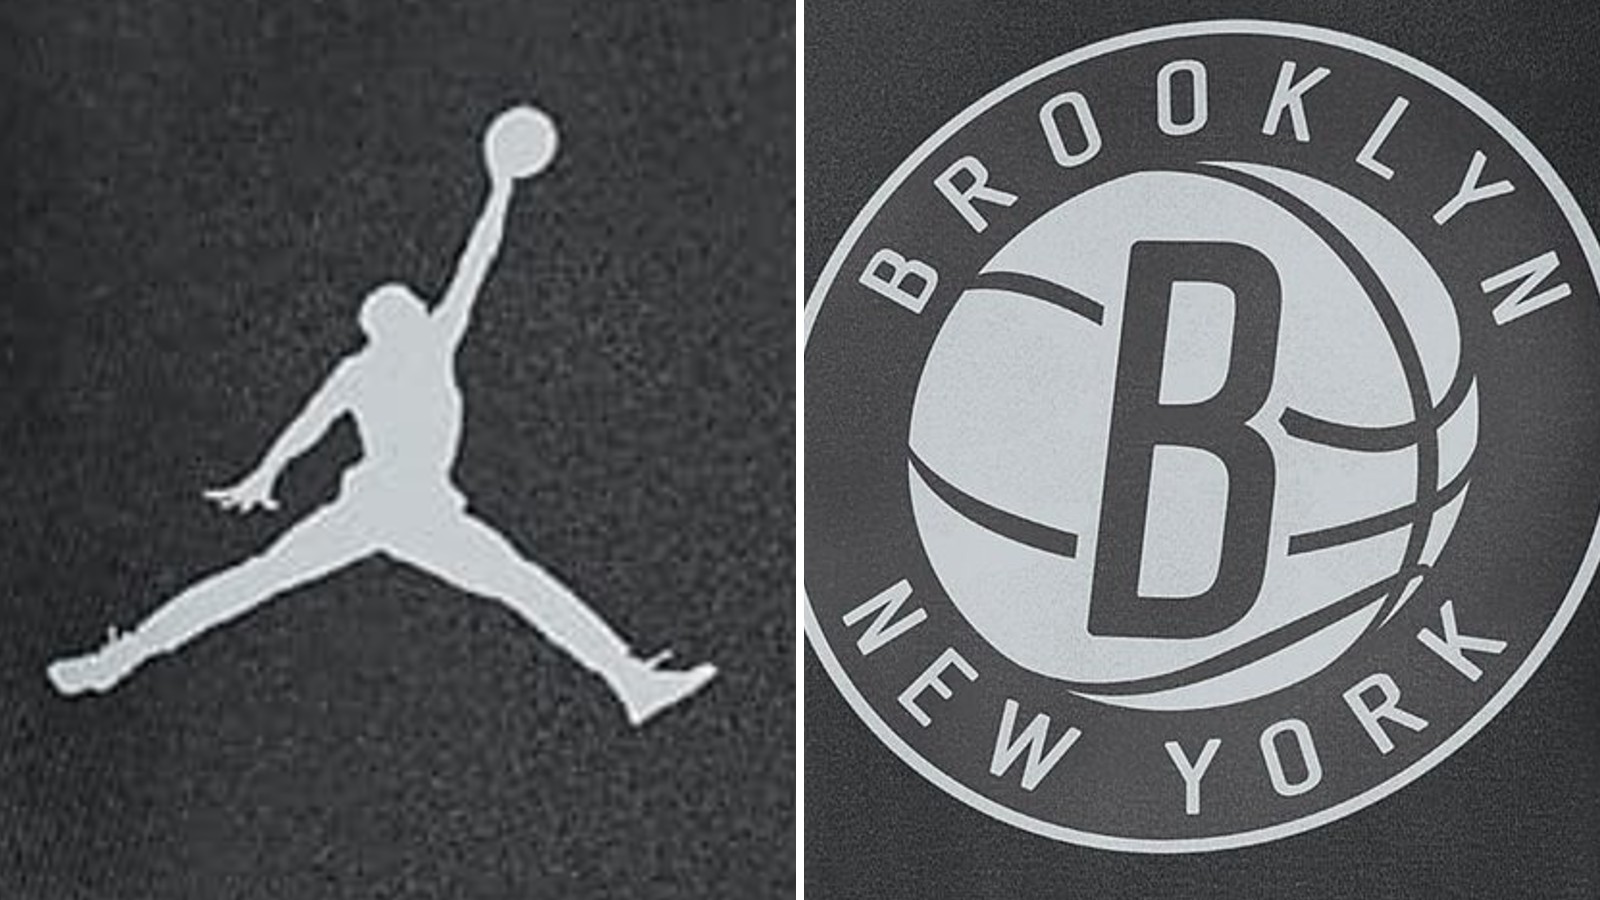 The Nets get awesome new jerseys inspired by the Brooklyn Bridge - Curbed NY